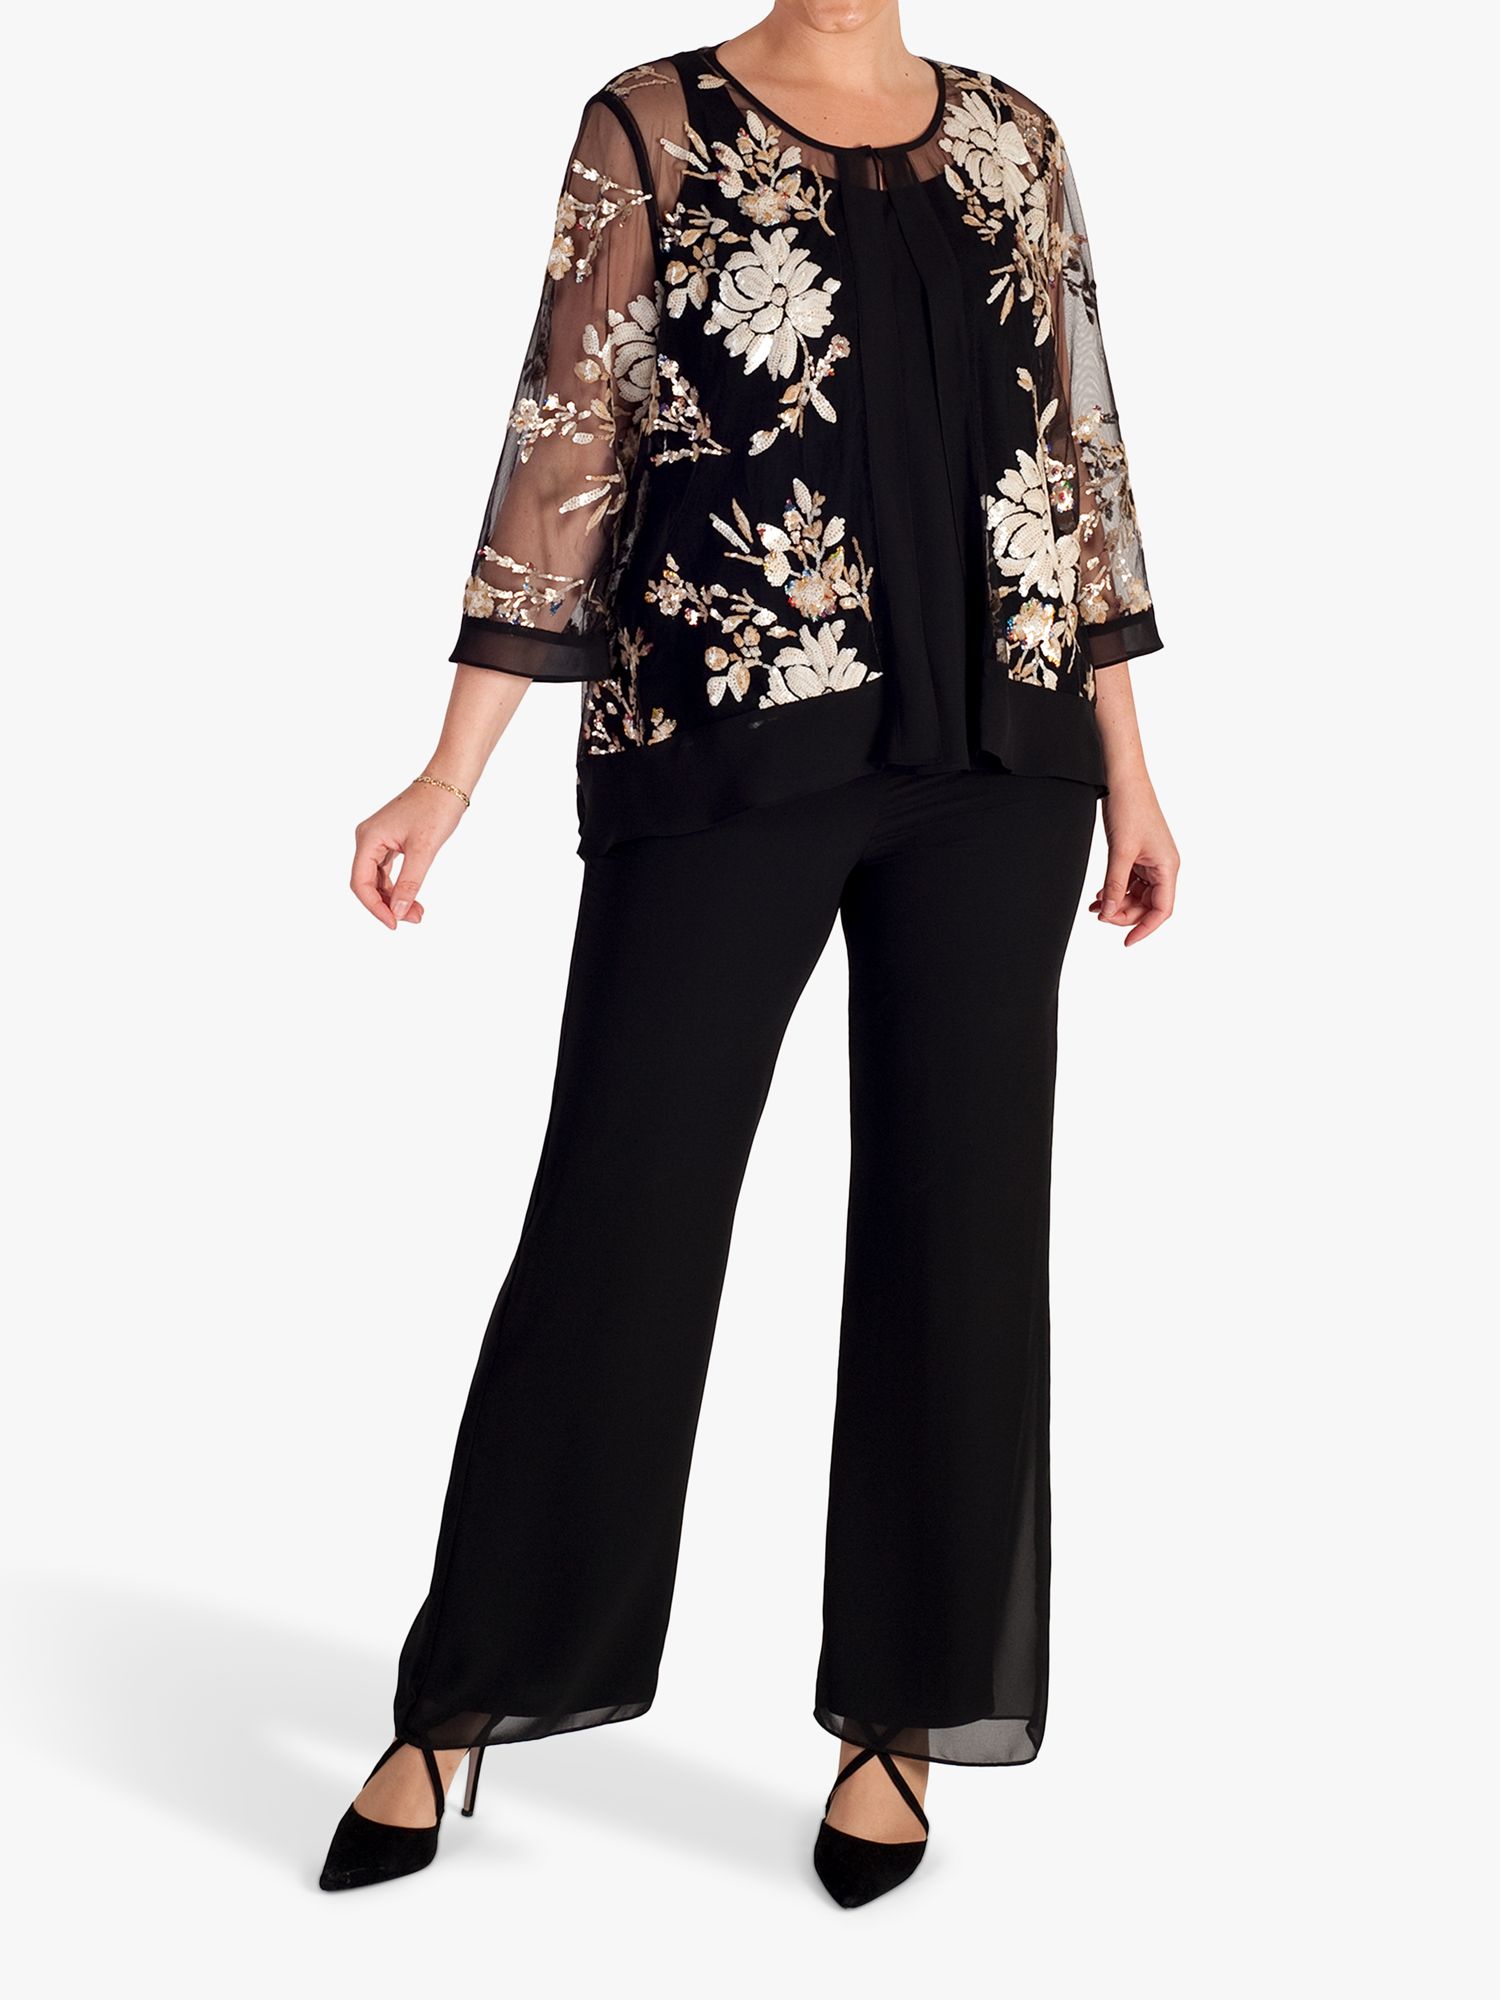 chesca Embroidered Sequin Mesh Jacket, Black at John Lewis & Partners